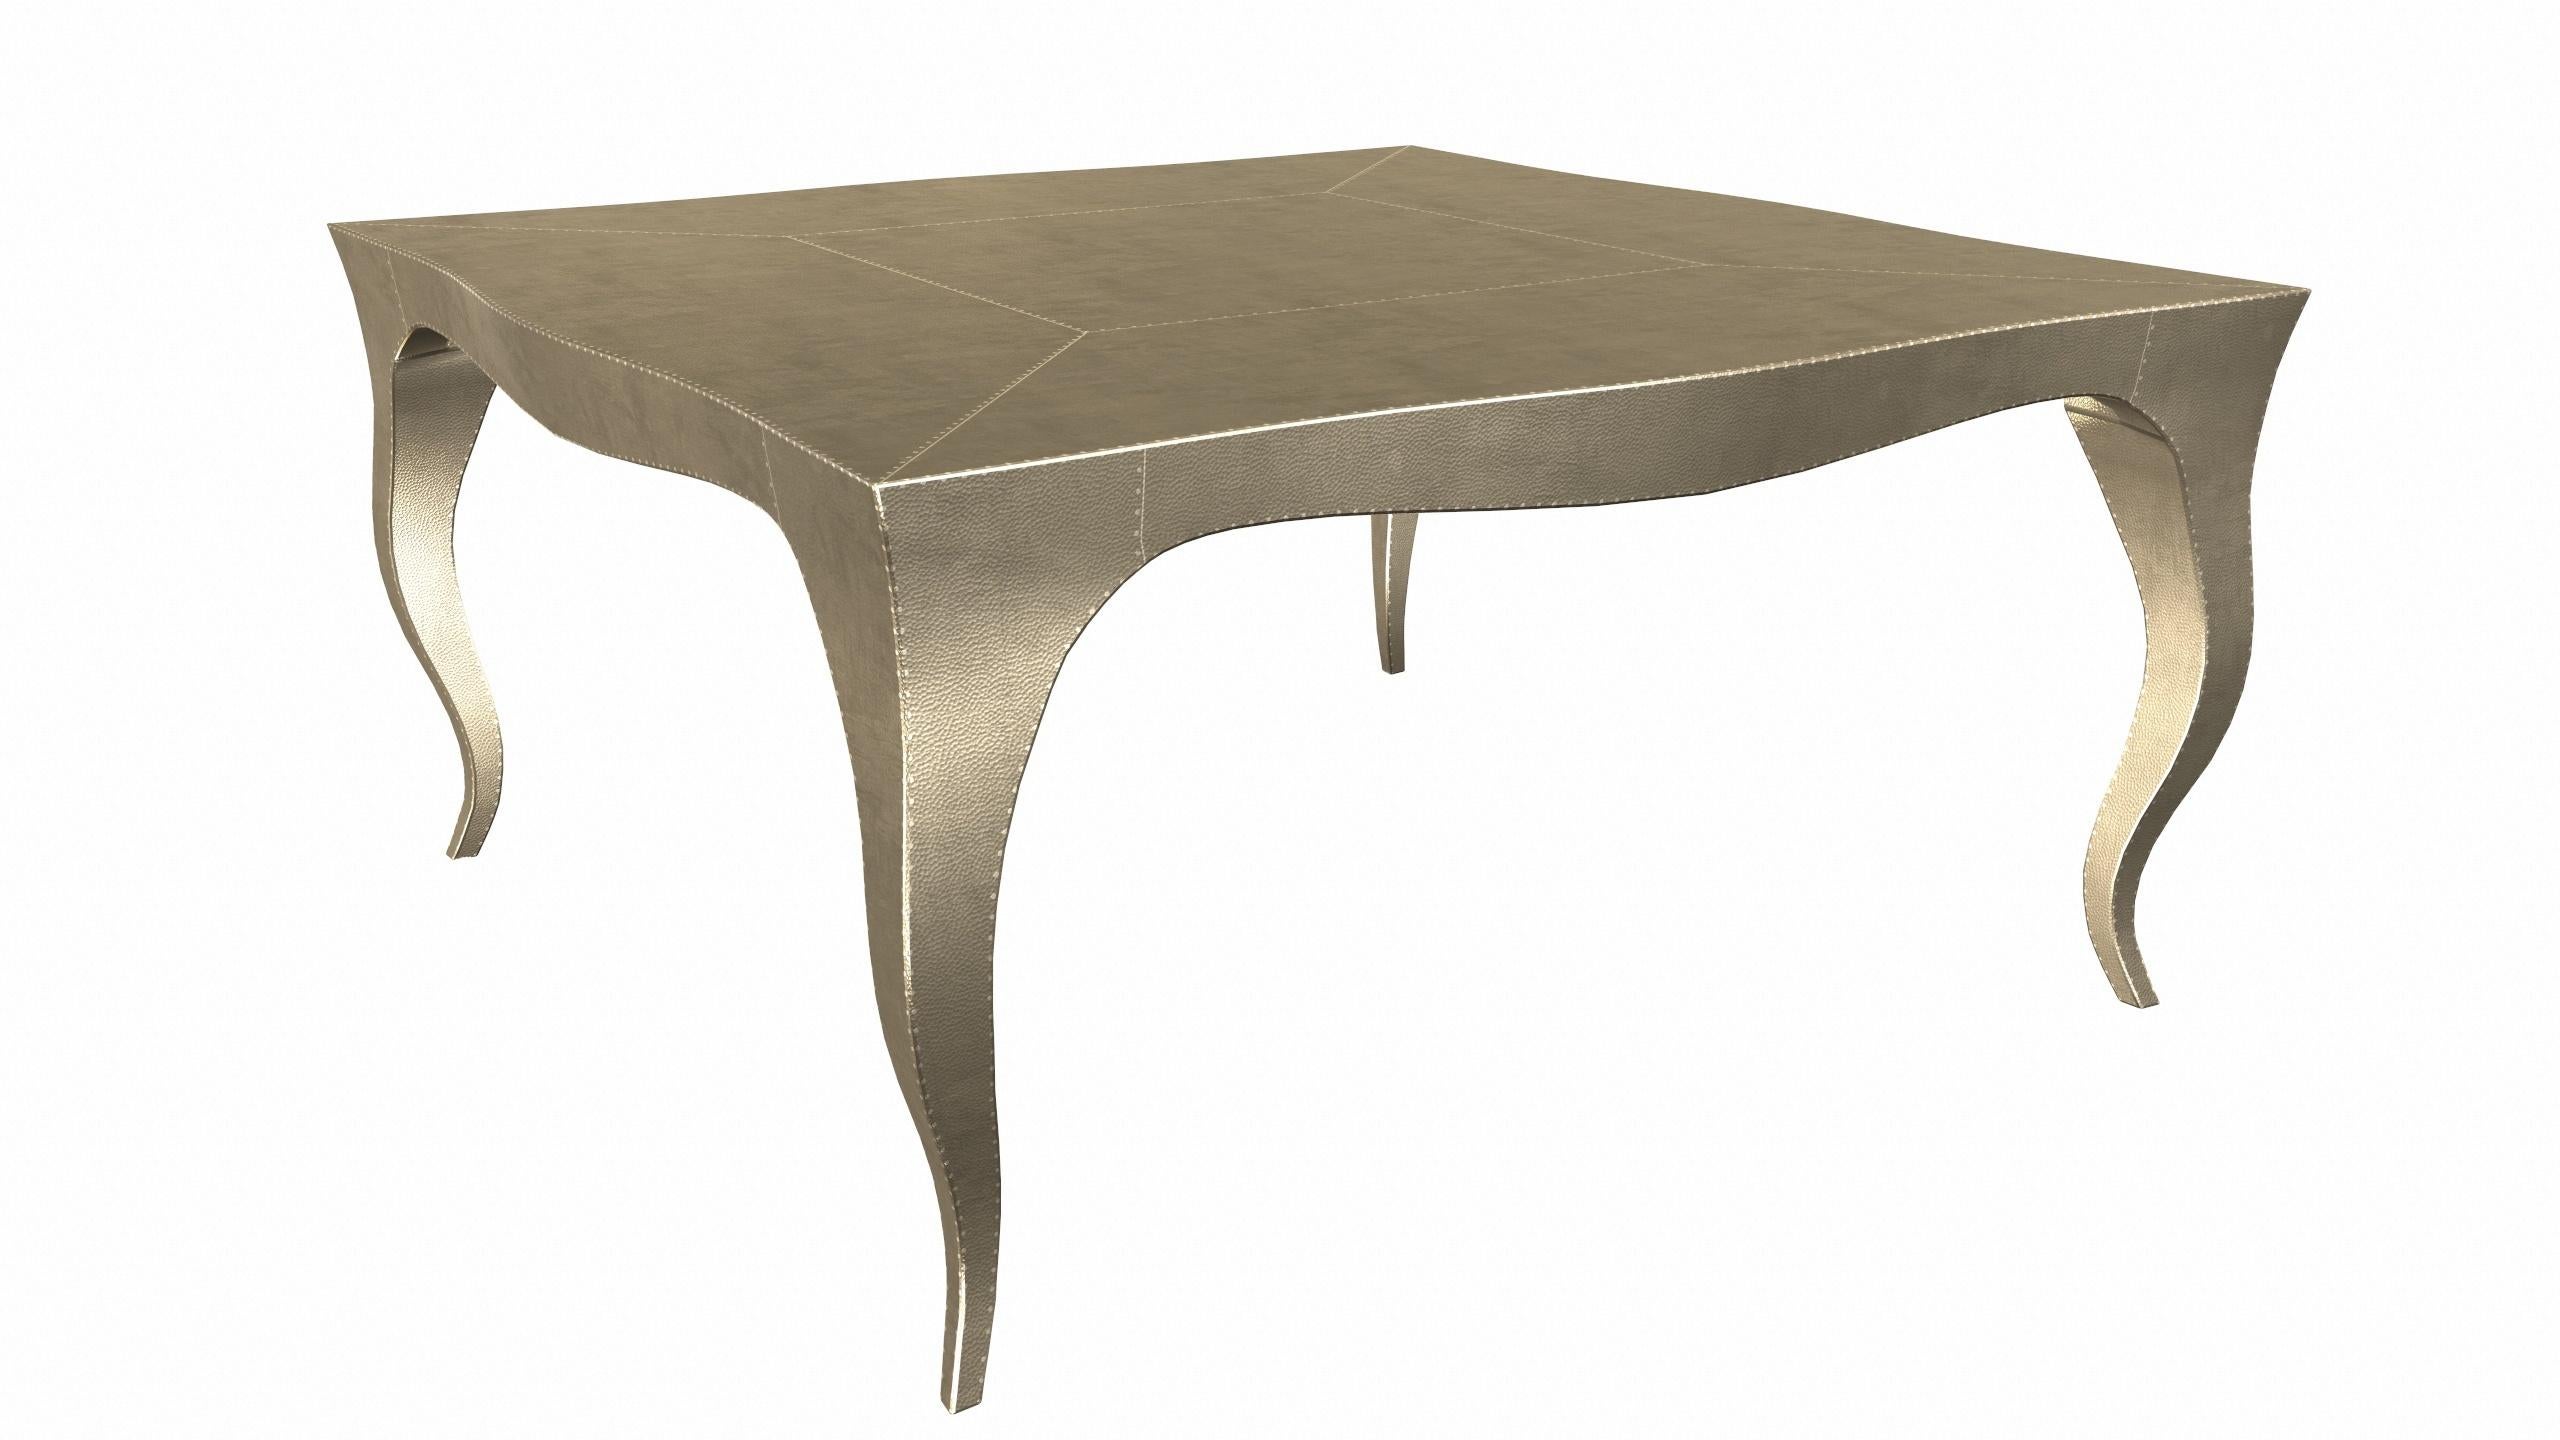 Metal Louise Art Deco Game Tables Mid. Hammered Brass by Paul Mathieu for S.Odegard For Sale